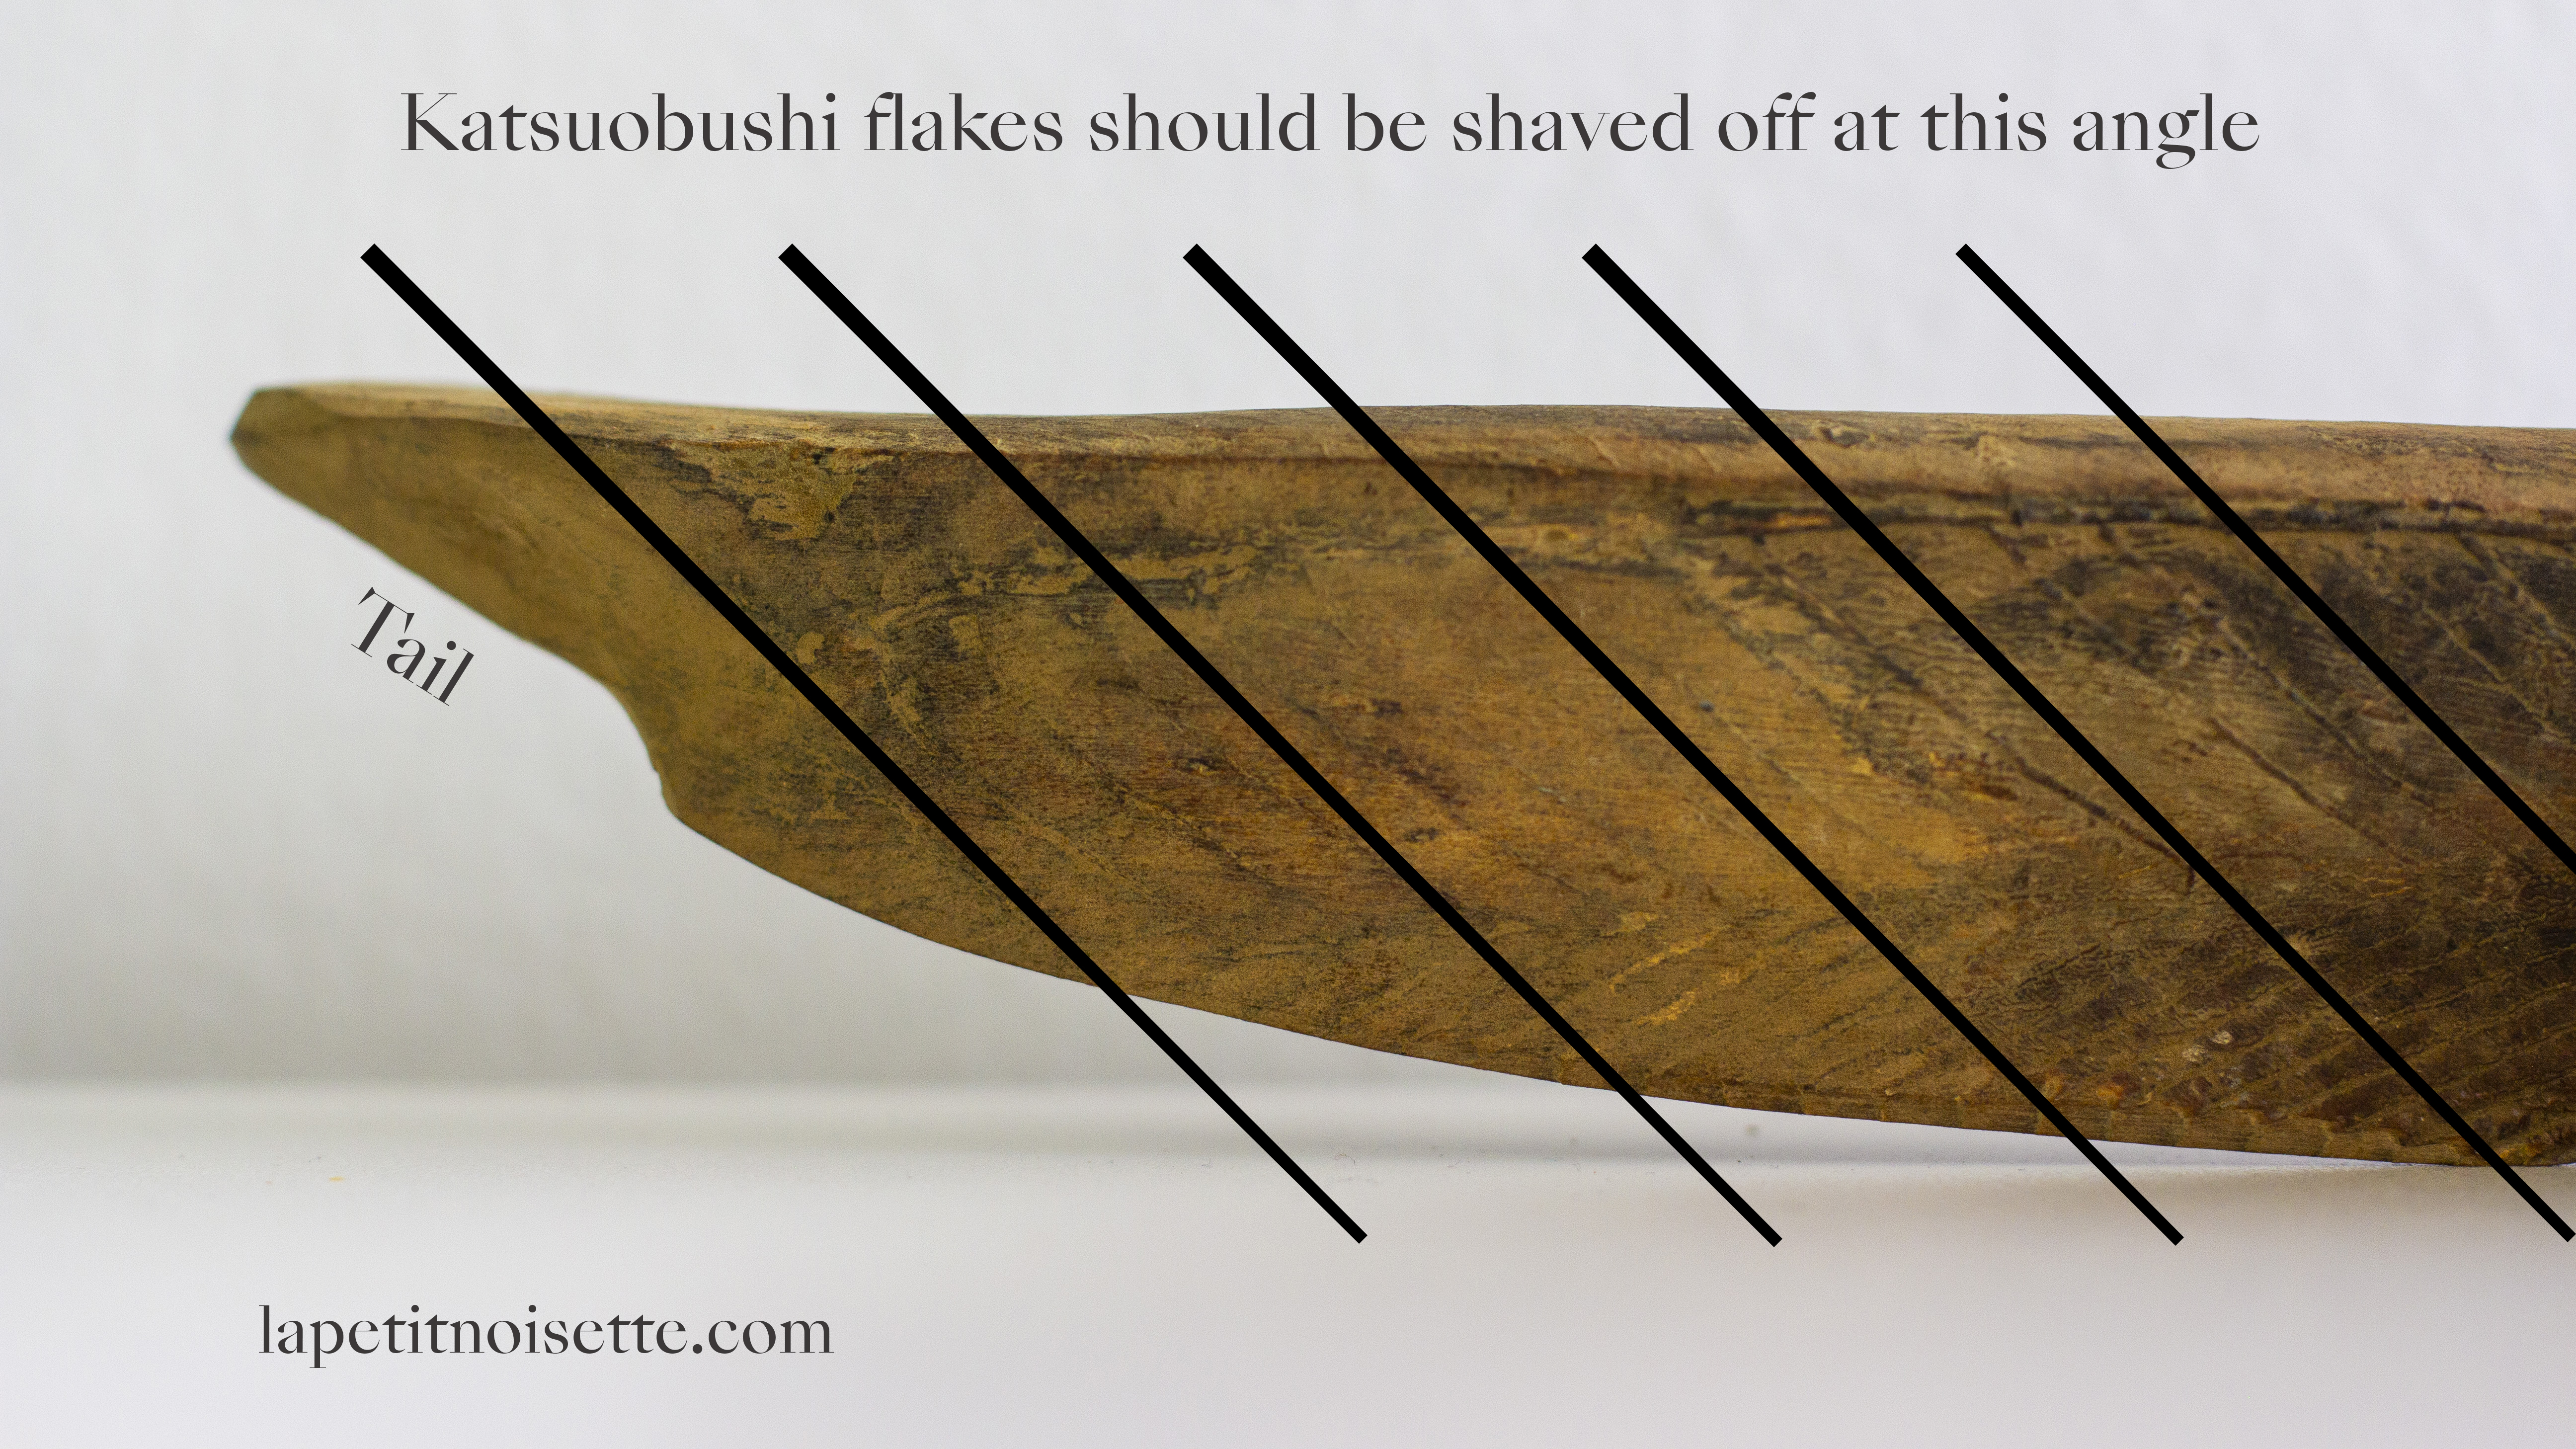 The angle at which the ventral fillets of a katsuobushi should be shaved.